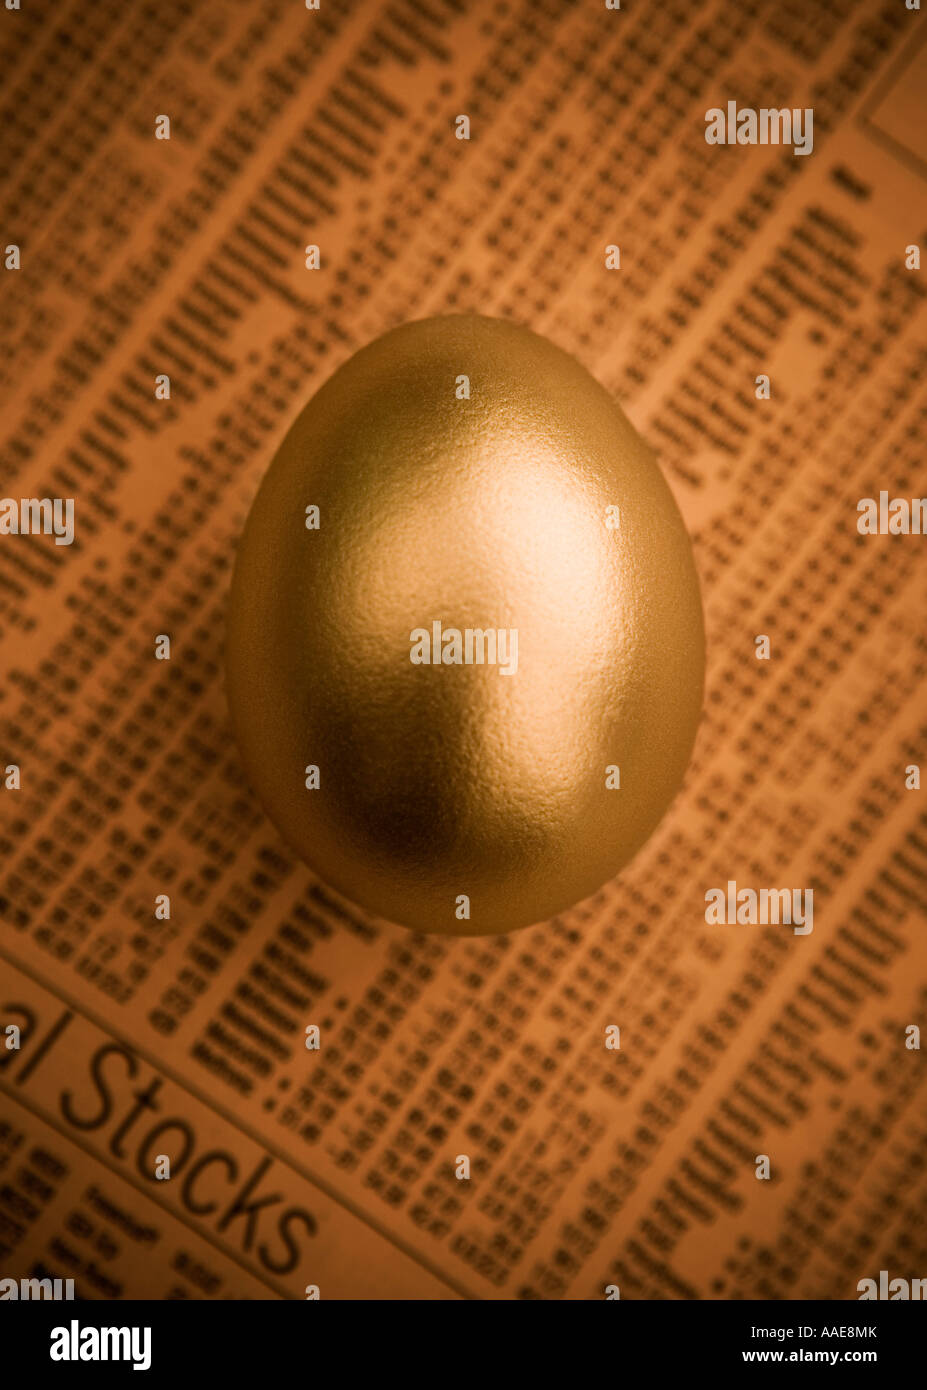 A studio shot of a golden egg on a stocks and shares print out. Stock Photo